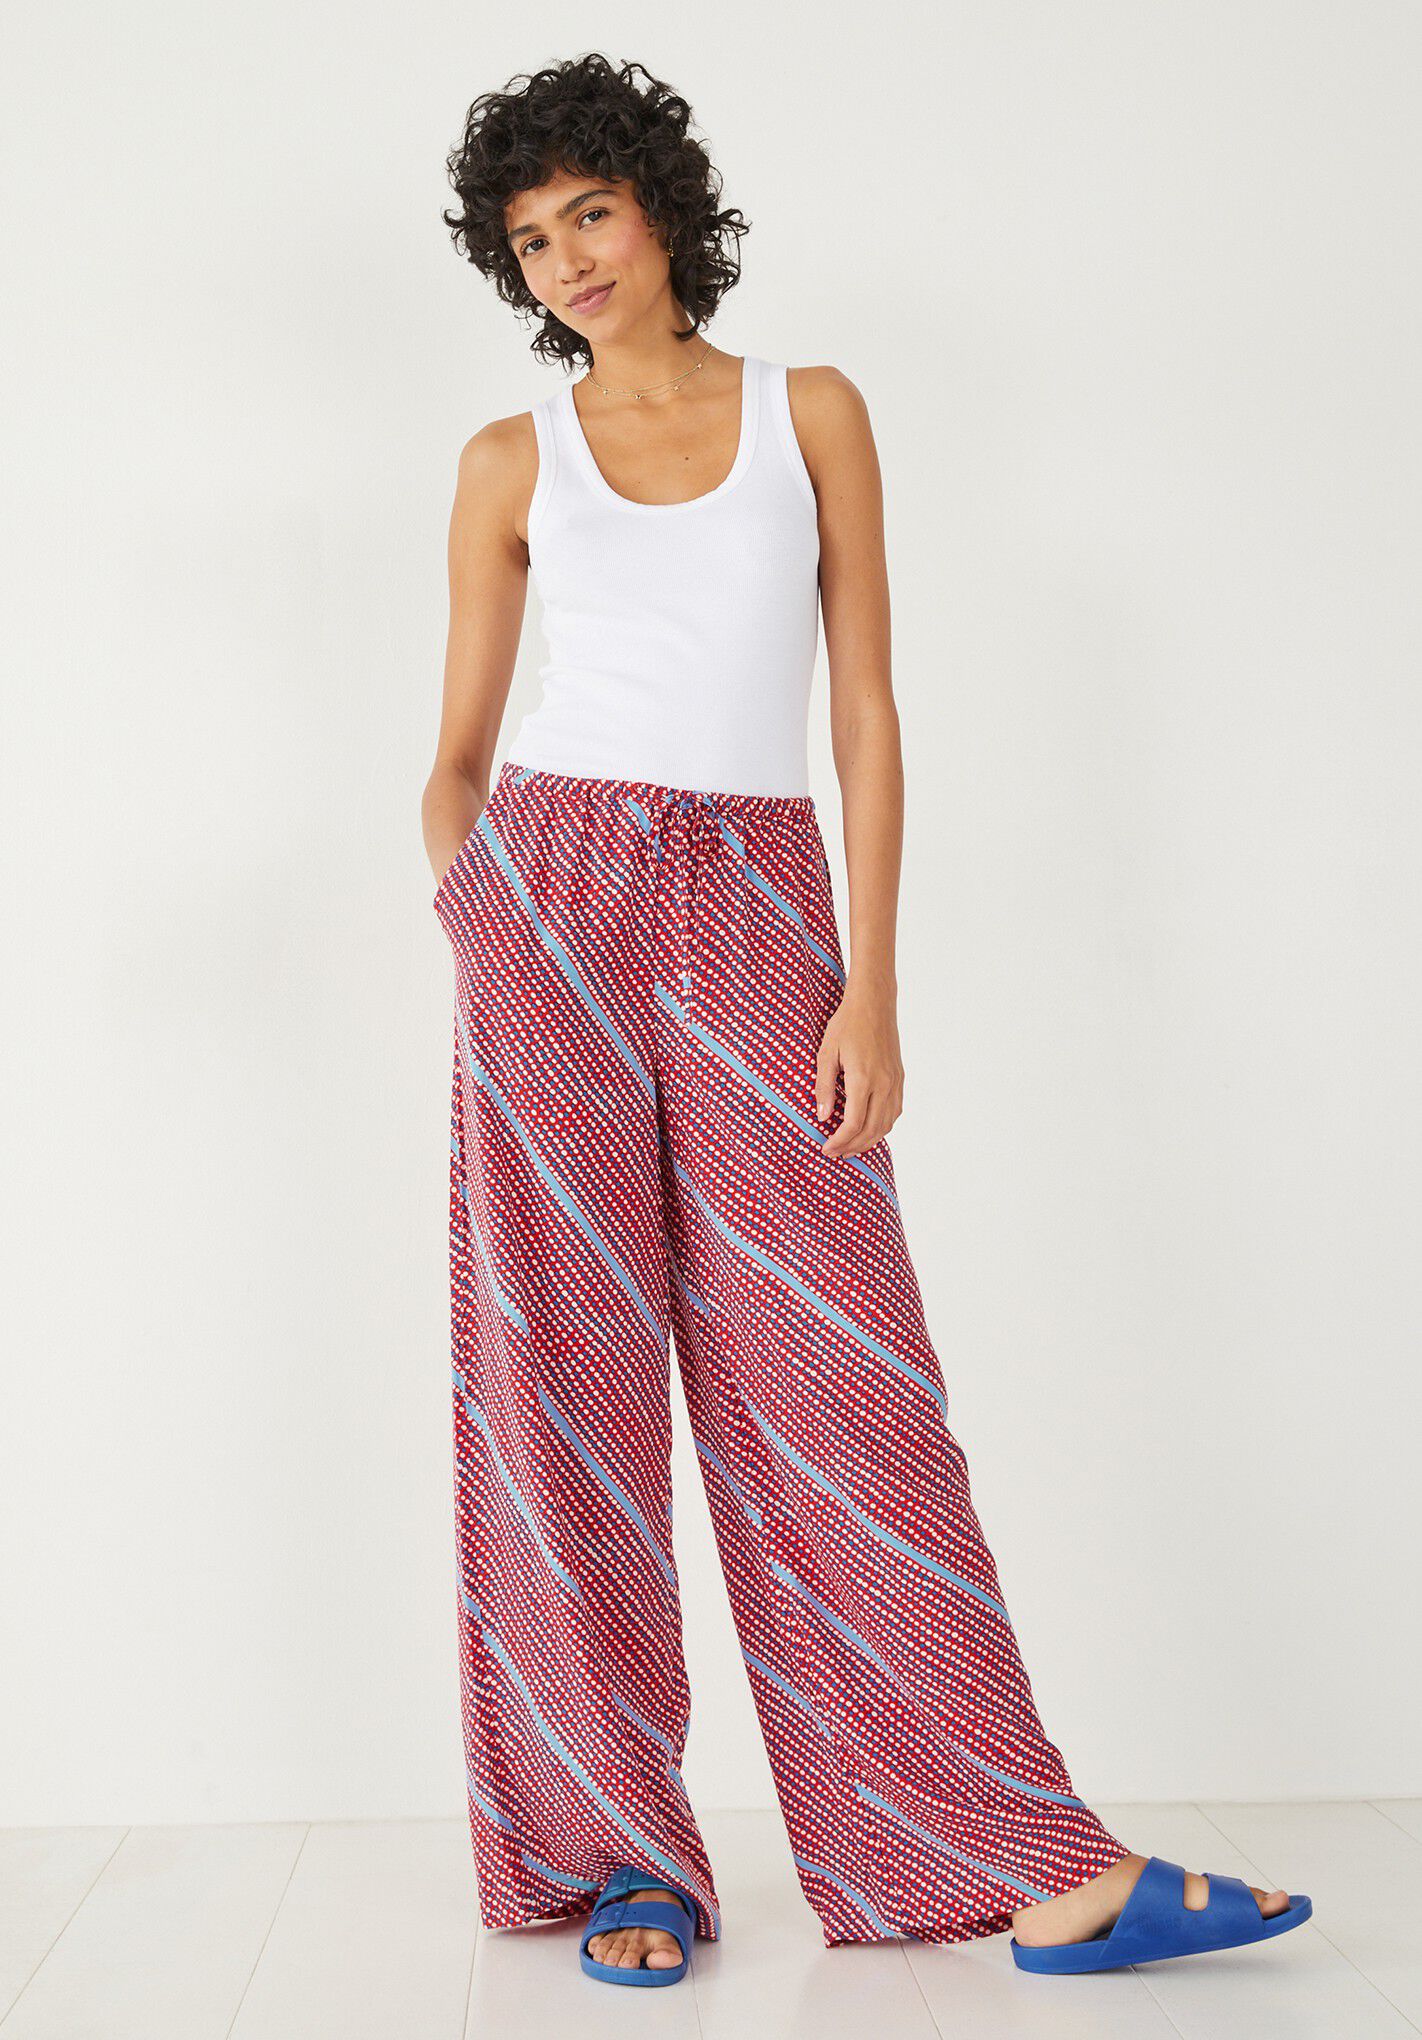 Printed Trousers for Women  Print Trousers  Next Official Site